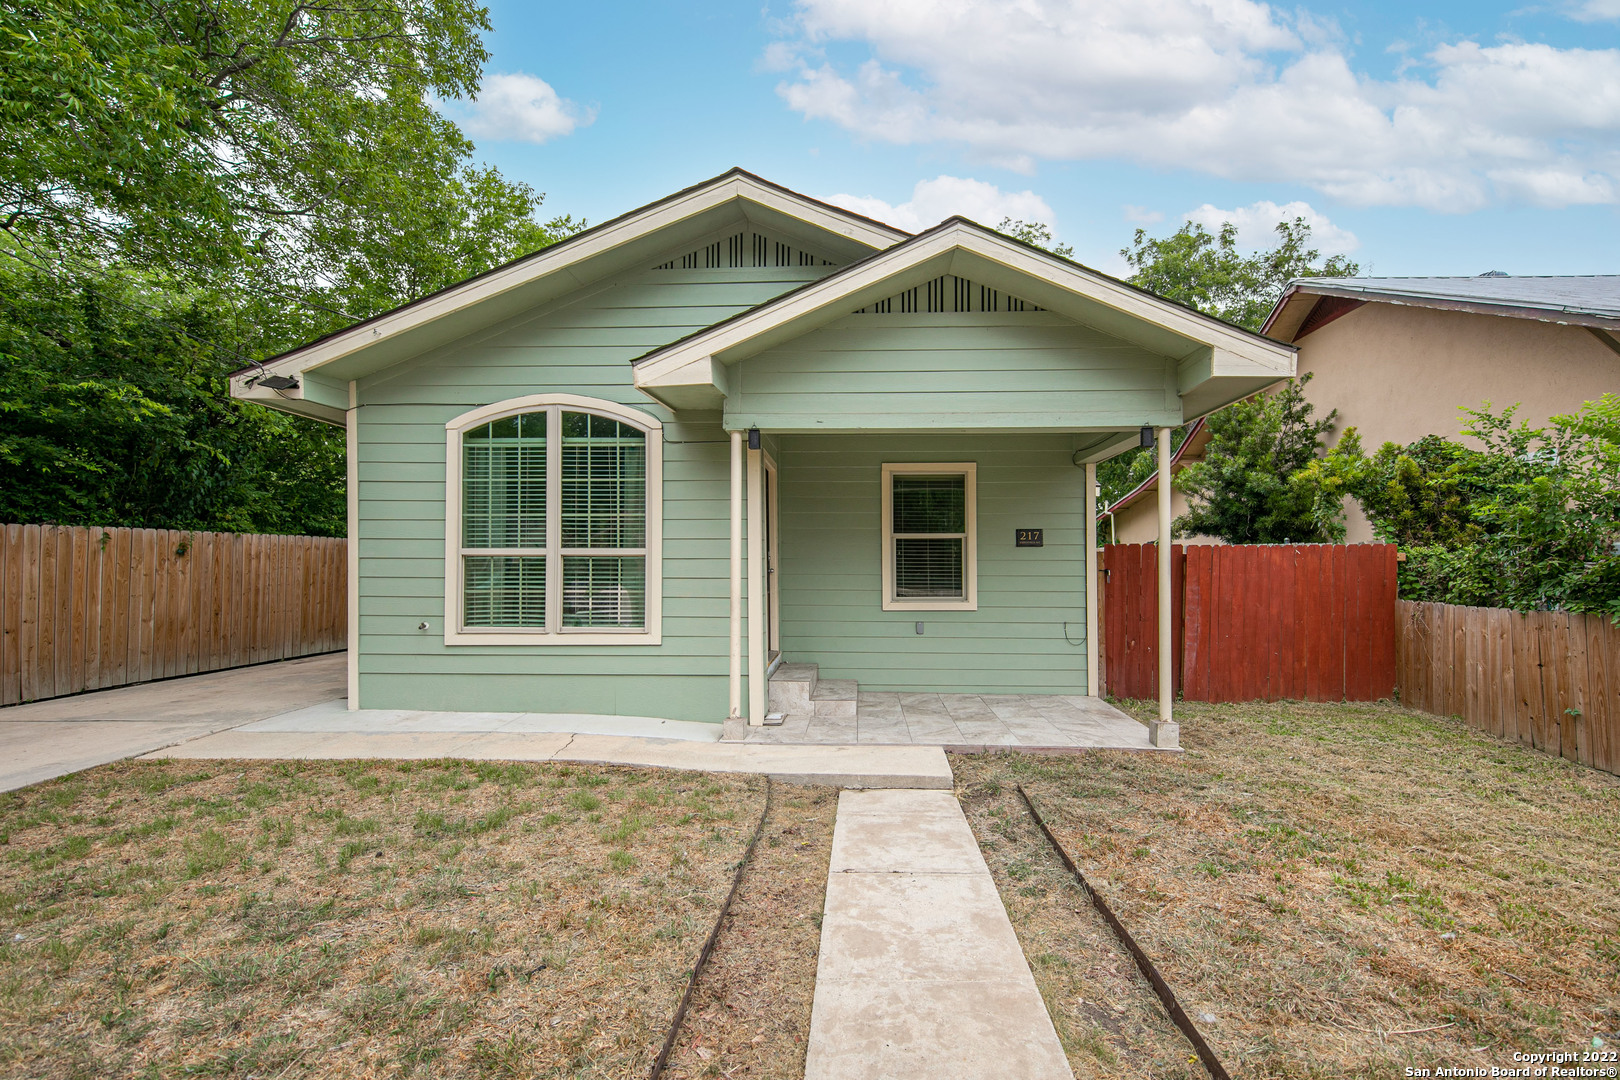 Beautifully renovated in 2020, this classic bungalow is perfectly located just 10 minutes from Downtown San Antonio! The interior is light and bright with elegant ceramic tile flooring throughout the entire home - no carpet anywhere! The entry leads you to a living/dining combo accentuated with upscale crown molding that opens to the chef's kitchen featuring granite countertops, sleek stainless-steel appliances, and a large breakfast bar with additional storage space. Near the kitchen is an additional dining area with a modern light fixture where you can host family and friends for festive meals. The primary suite is huge with a lovely tray ceiling, LED recessed lighting, a large walk-in closet, and a spa-like en-suite well-equipped with a granite-topped dual vanity, vessel sinks, and a frameless walk-in shower. The secondary bedrooms are well-sized and include private bathrooms. The backyard offers lots of space for outdoor activities and features a wood privacy fence and a covered patio where you can lounge in the shade or grill with friends on a sunny day. Easy access to area schools, shops, restaurants, grocery stores, and everything San Antonio has to offer. Schedule a showing today!